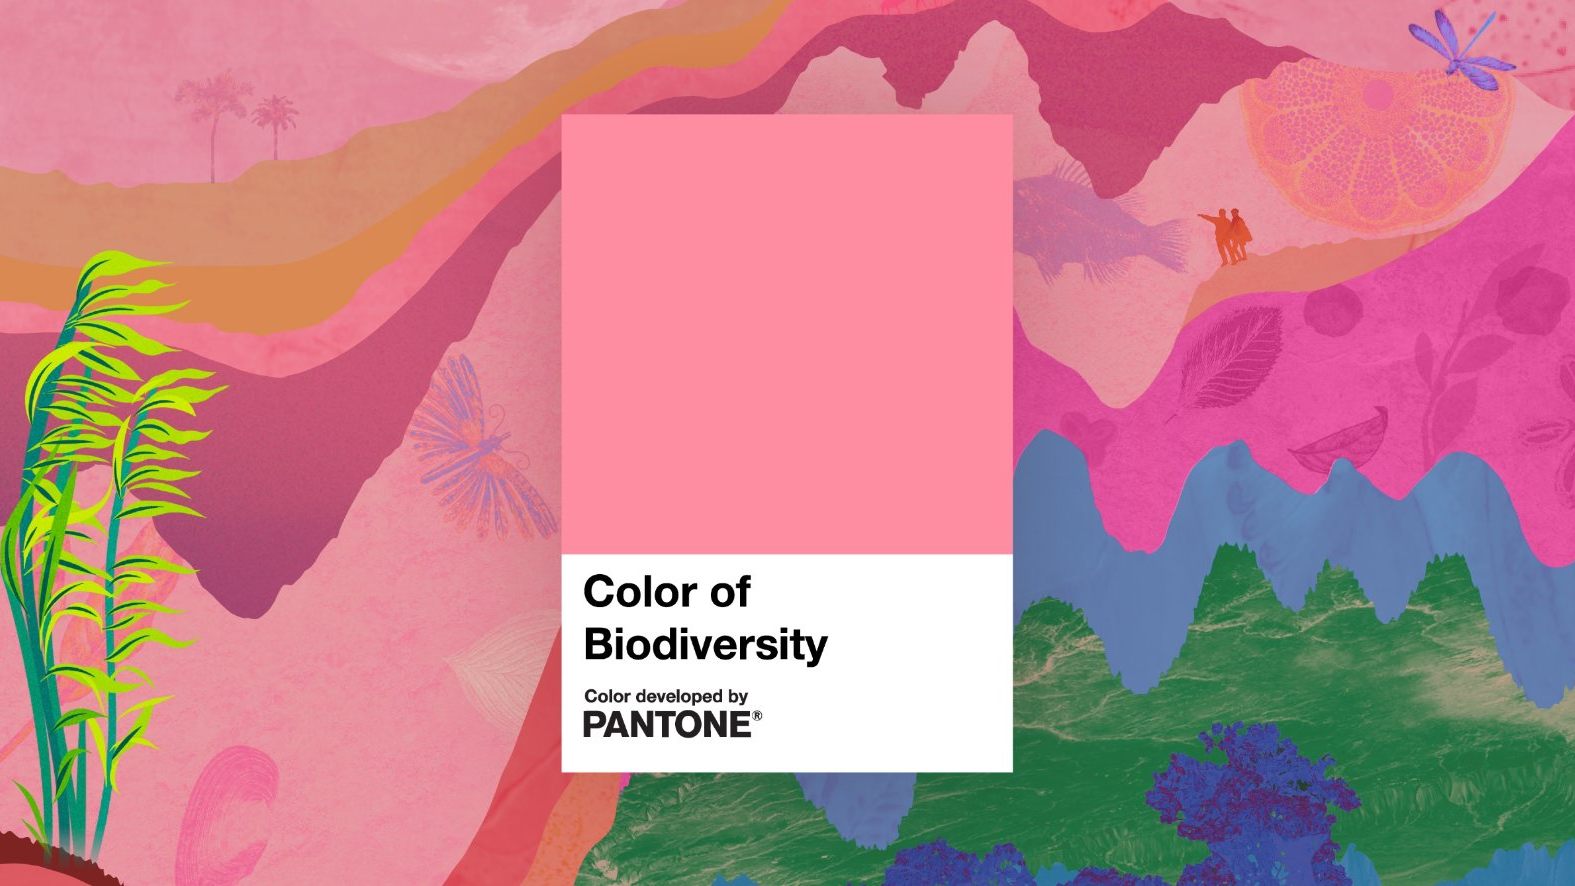 Pantone and Tealeaves Call Attention To Biodiversity Threat With New Fossil-Inspired Color